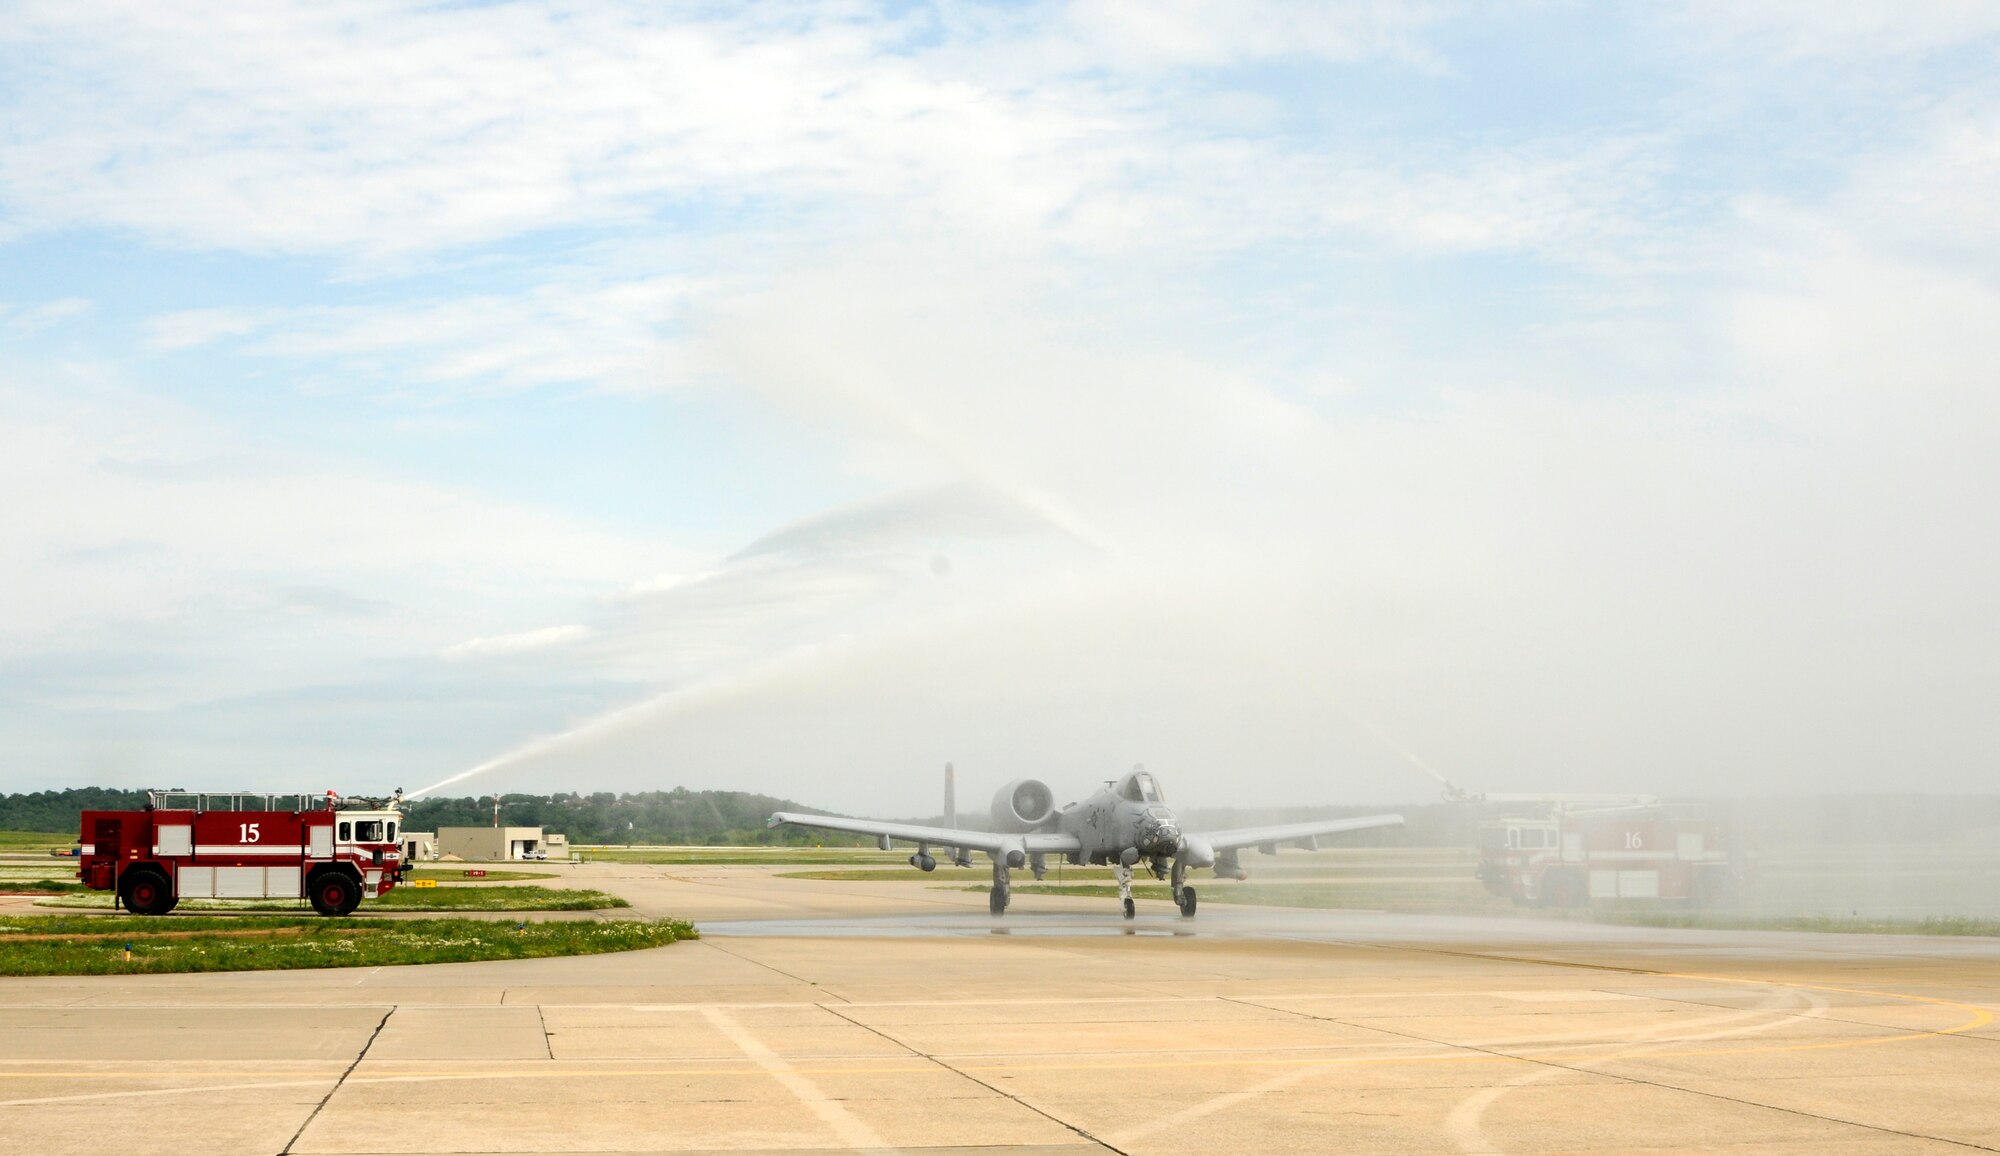 Col. Tom Anderson logged his A-10C Thunderbolt II “fini flight” at the 188th Fighter Wing April 12, 2012. Anderson’s final flight in the A-10 preceded a change-of-command ceremony in which he relinquished command of the 188th April 14. Anderson served as the 188th Fighter Wing commander from 2008-2012. During his career, Anderson accumulated more than 2,500 flying hours in the A-10, F-16 Fighting Falcon, T-38 and T-37 aircraft. (National Guard photo by Senior Master Sgt. Dennis Brambl/188th Fighter Wing Public Affairs)